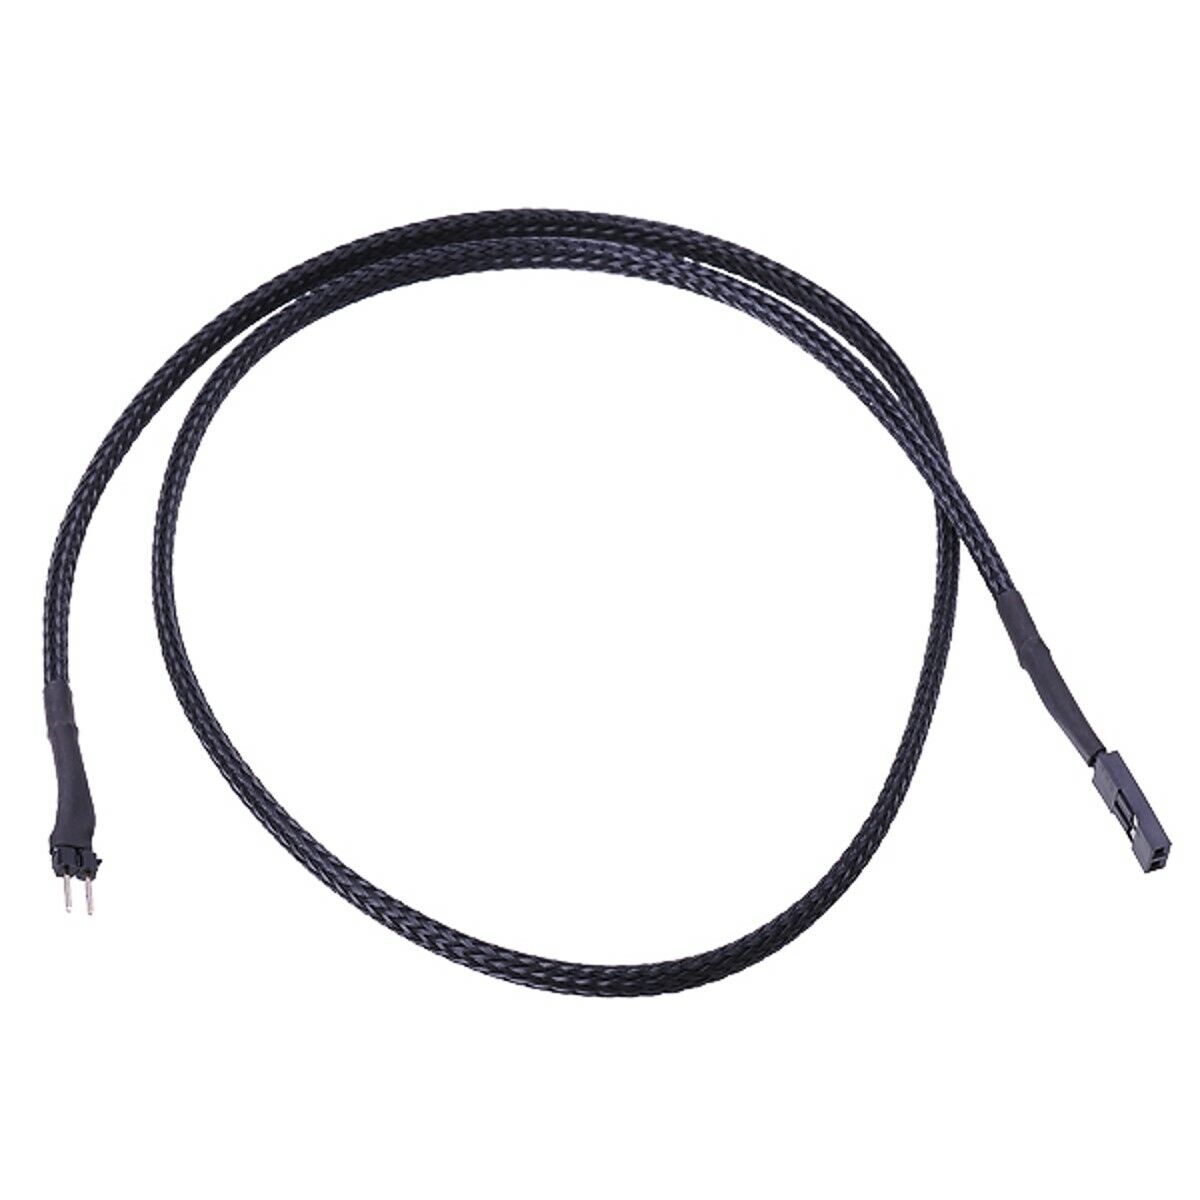 Phobya Extension Cable, 2-Pin, 60cm, Sleeved, Black